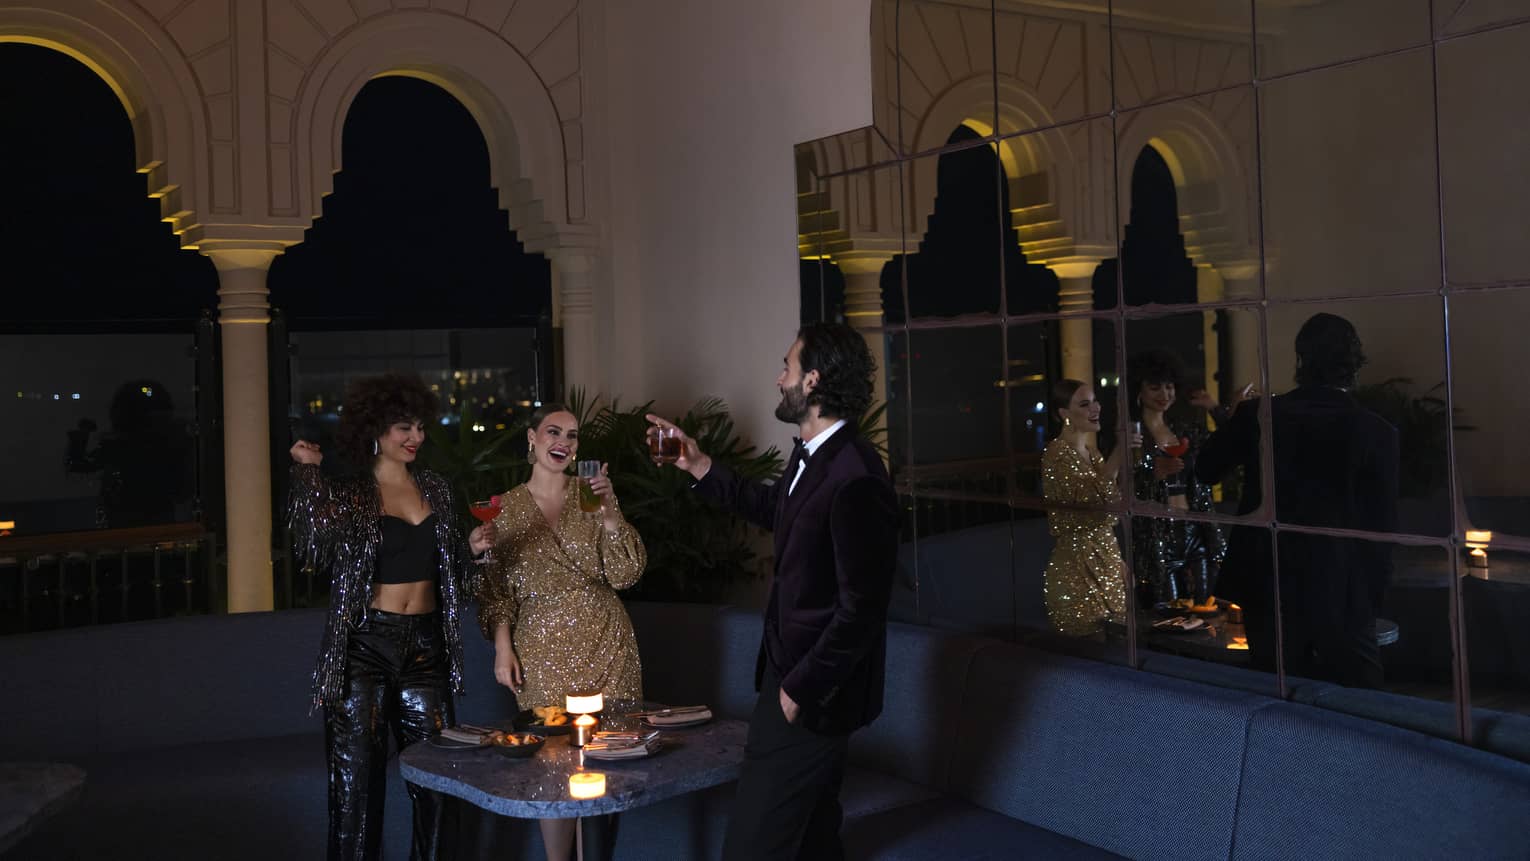 Two women and one man all dressed in cocktail attire raise a toast around a candlelit table next to a stone archway